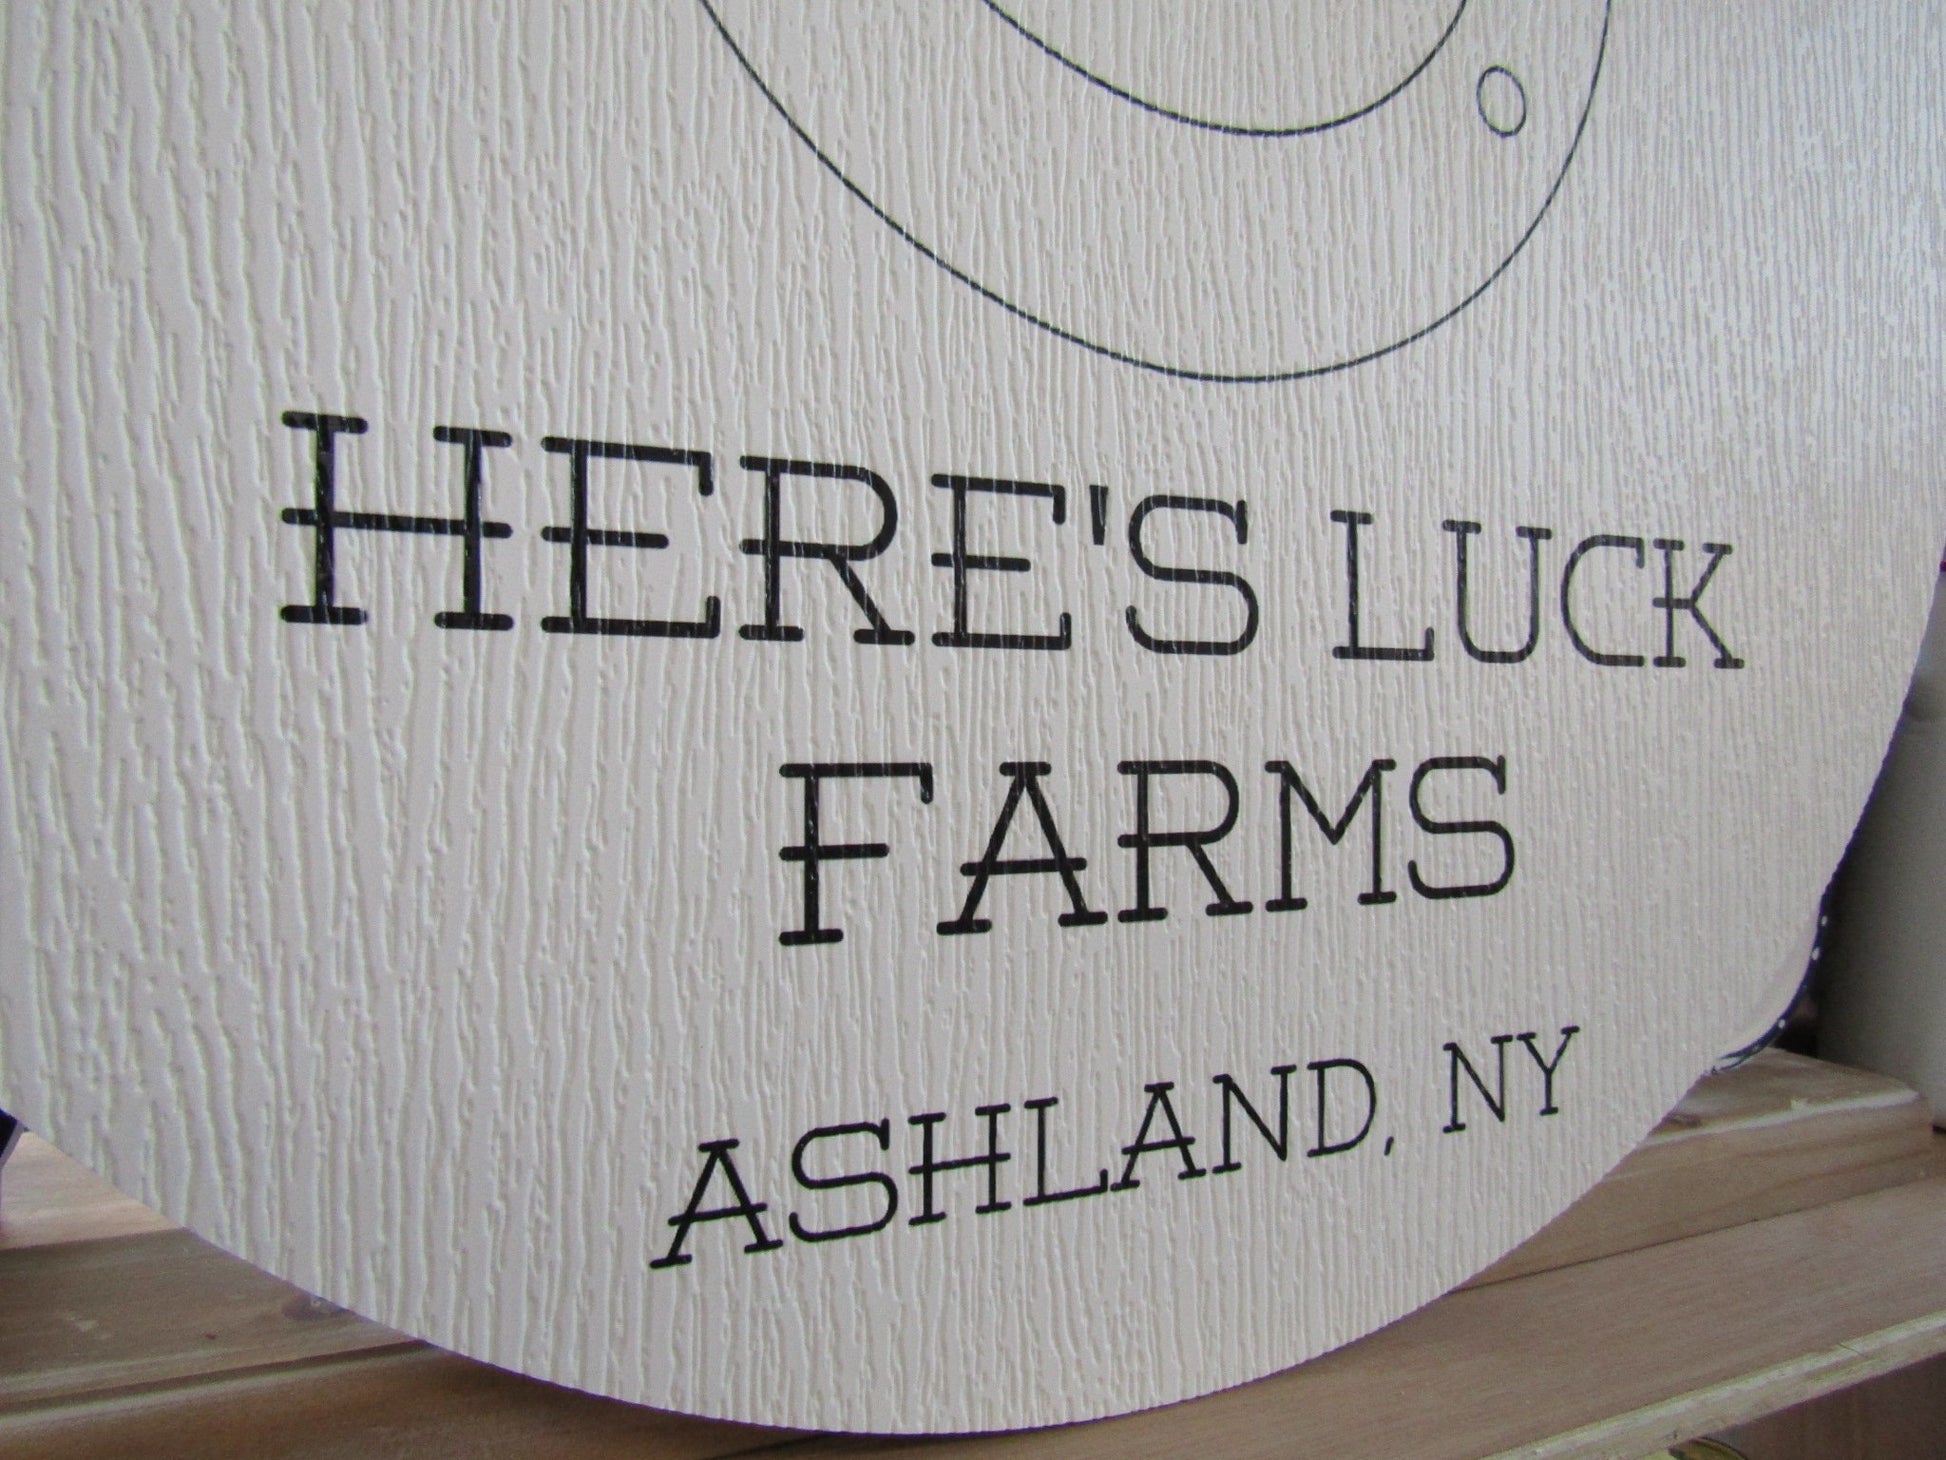 Custom Weatherproof PVC Sign Horseshoe Luck Farms Textured Personalized Circle Round Ready for your Business Logo Wall Hanging Or Mounted